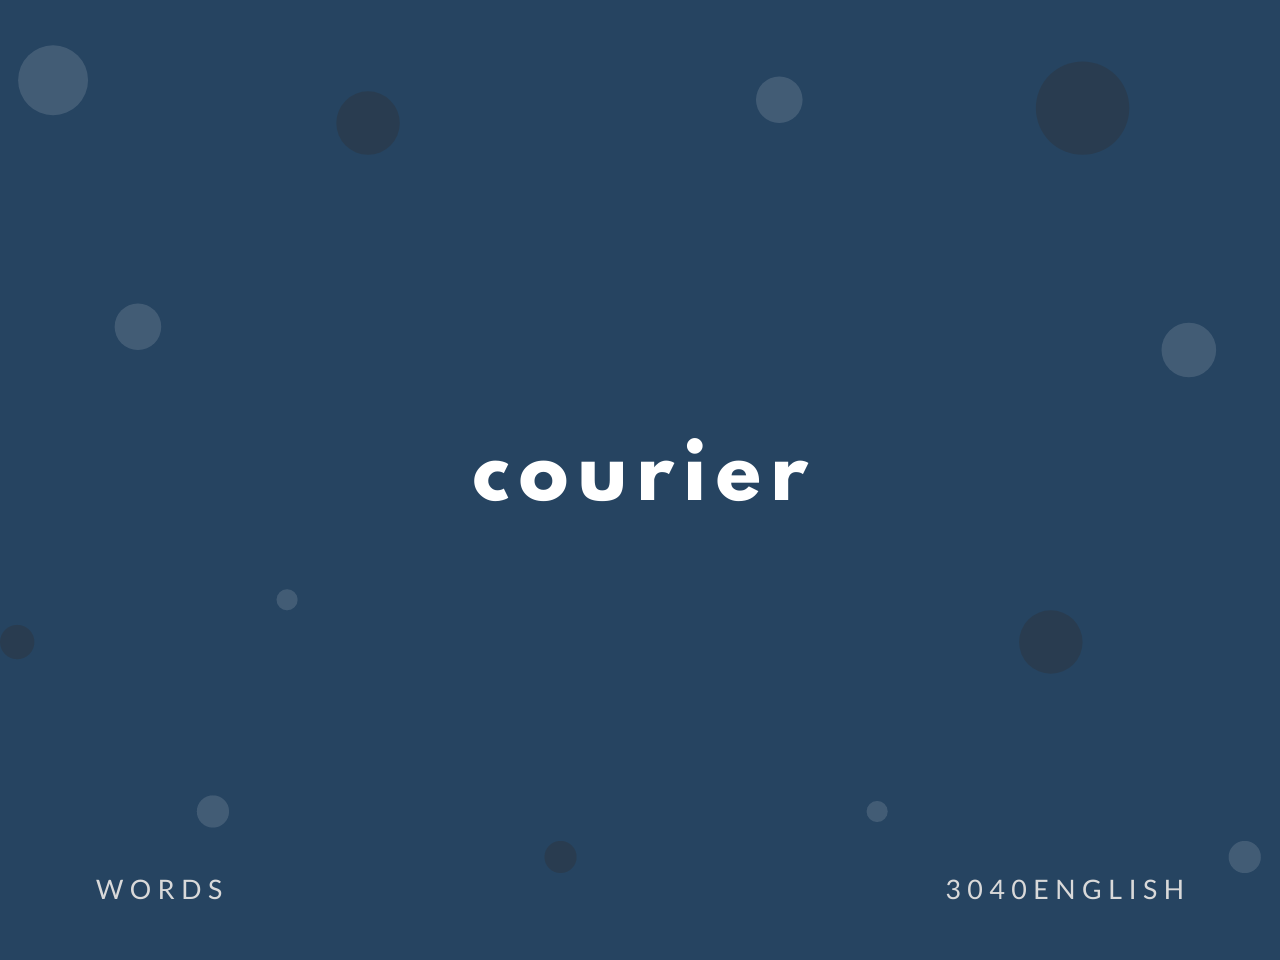 courier の意味と簡単な使い方【音読用例文あり】